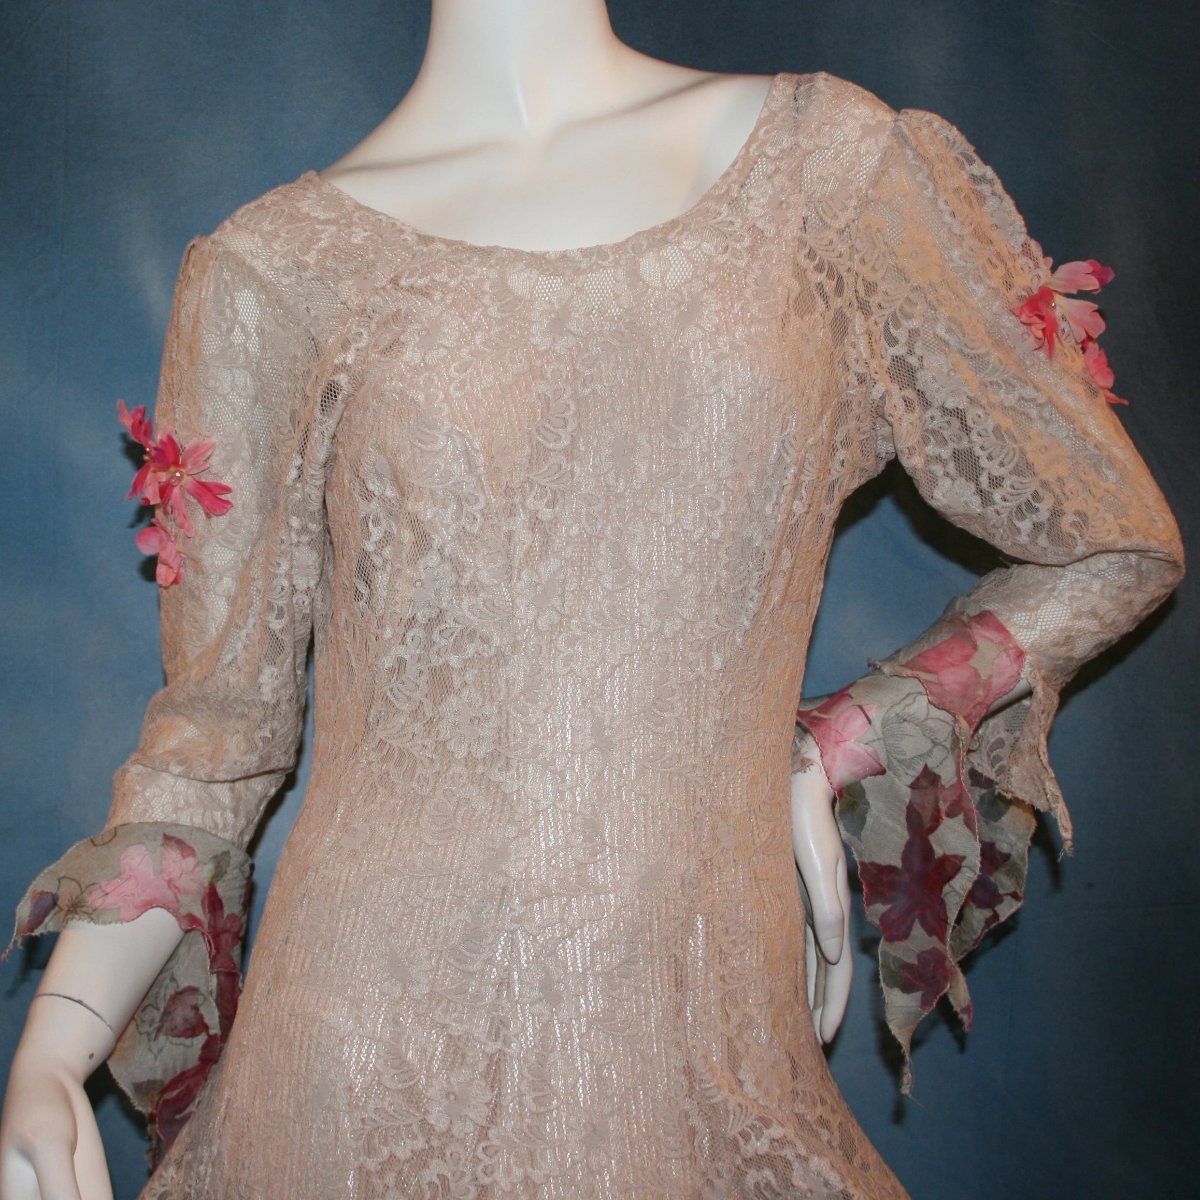 close upper view of Soft beige social ballroom dress created of beige stretch lace with oodles of beige & pink flower print semi-sheer flounces, a touch of pink silk flowers with beading, & under slip dress. A great beginner ballroom dance show dress!